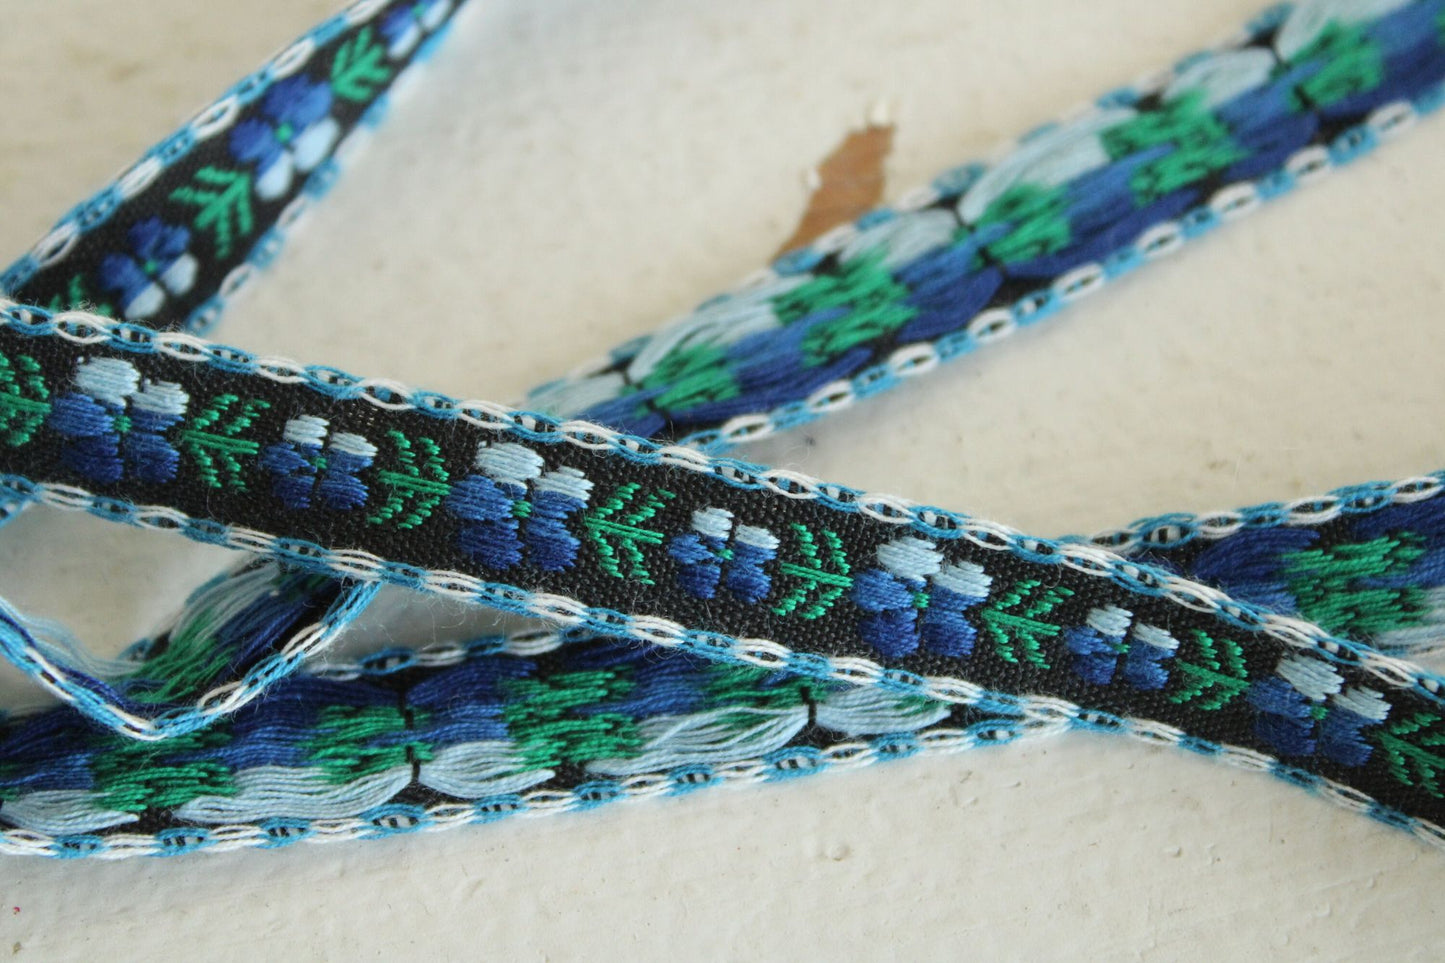 Vintage Embroidered Ribbon Trim Floral Blue Black And White  1/2", 2 yards